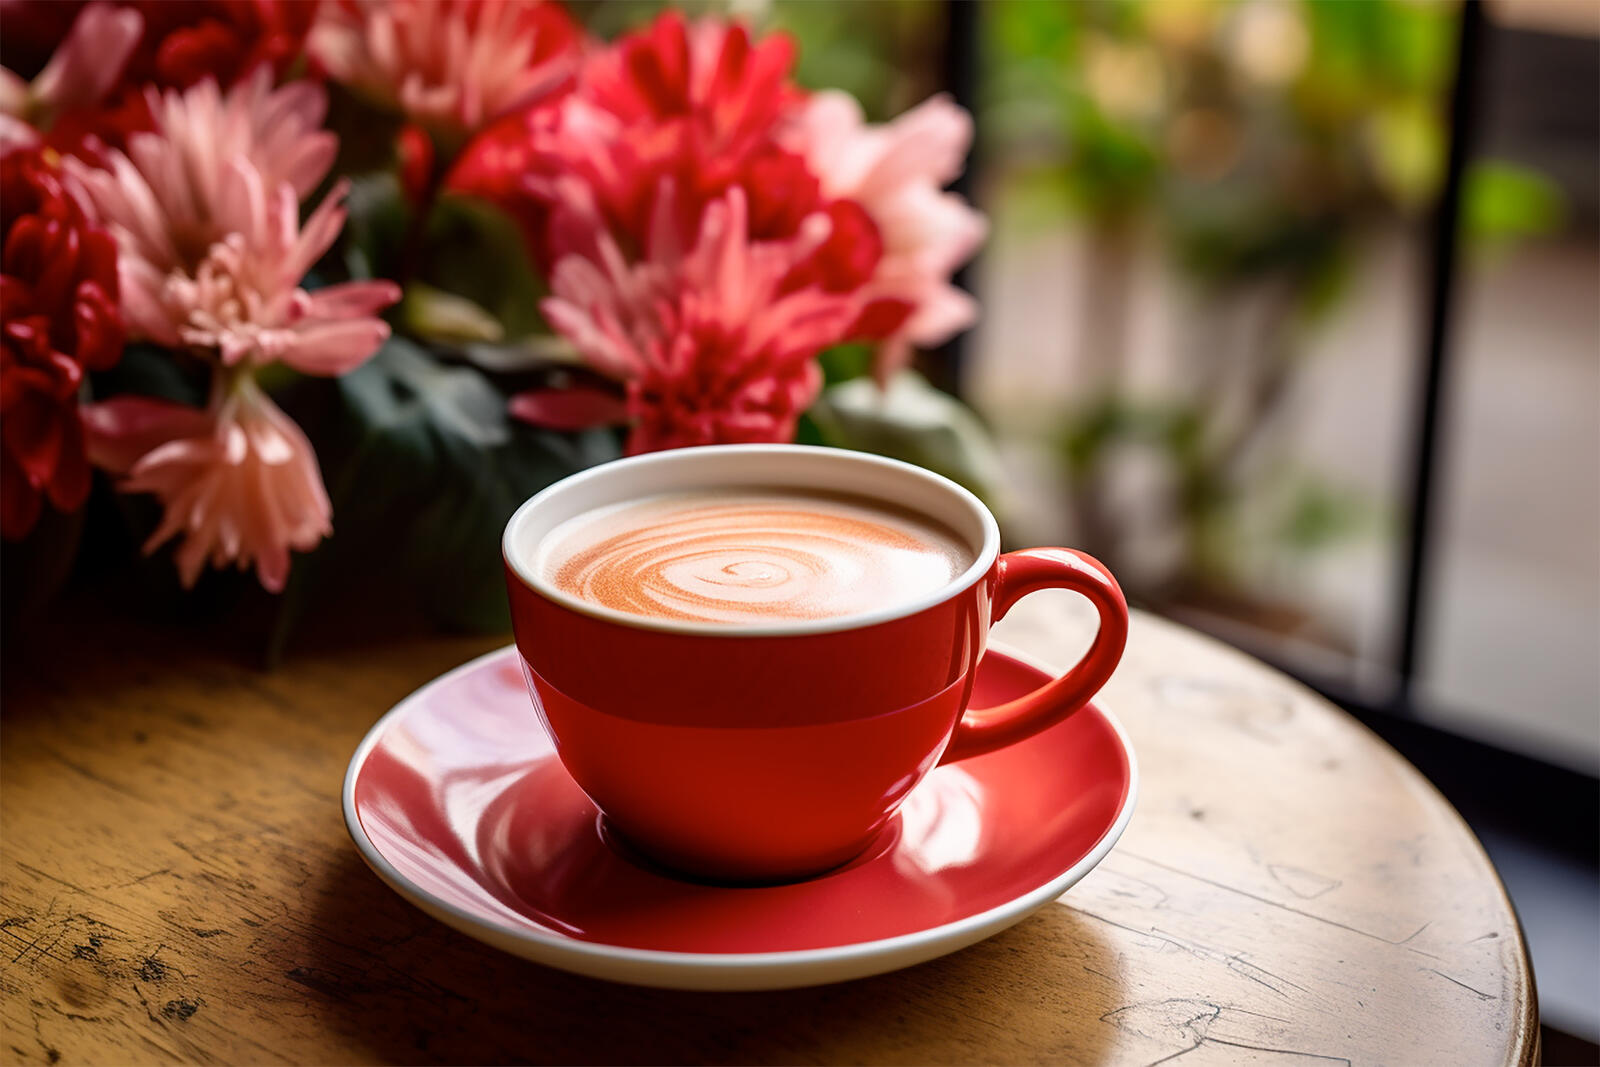 Free photo A cup of coffee on the table with a red bouquet of flowers